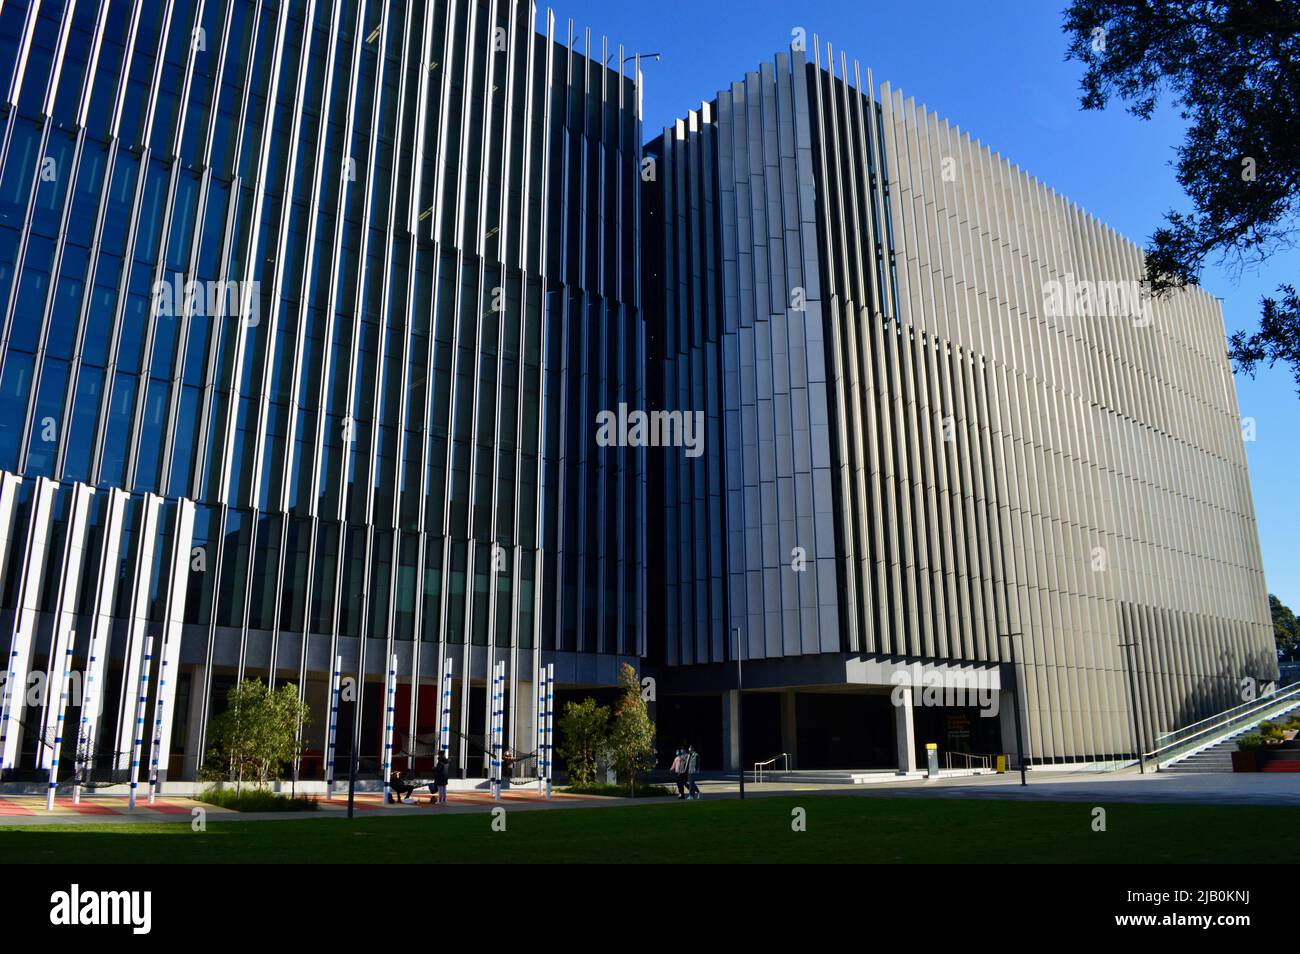 The Science Block at University of New South Wales in Sydney, Australia Stock Photo